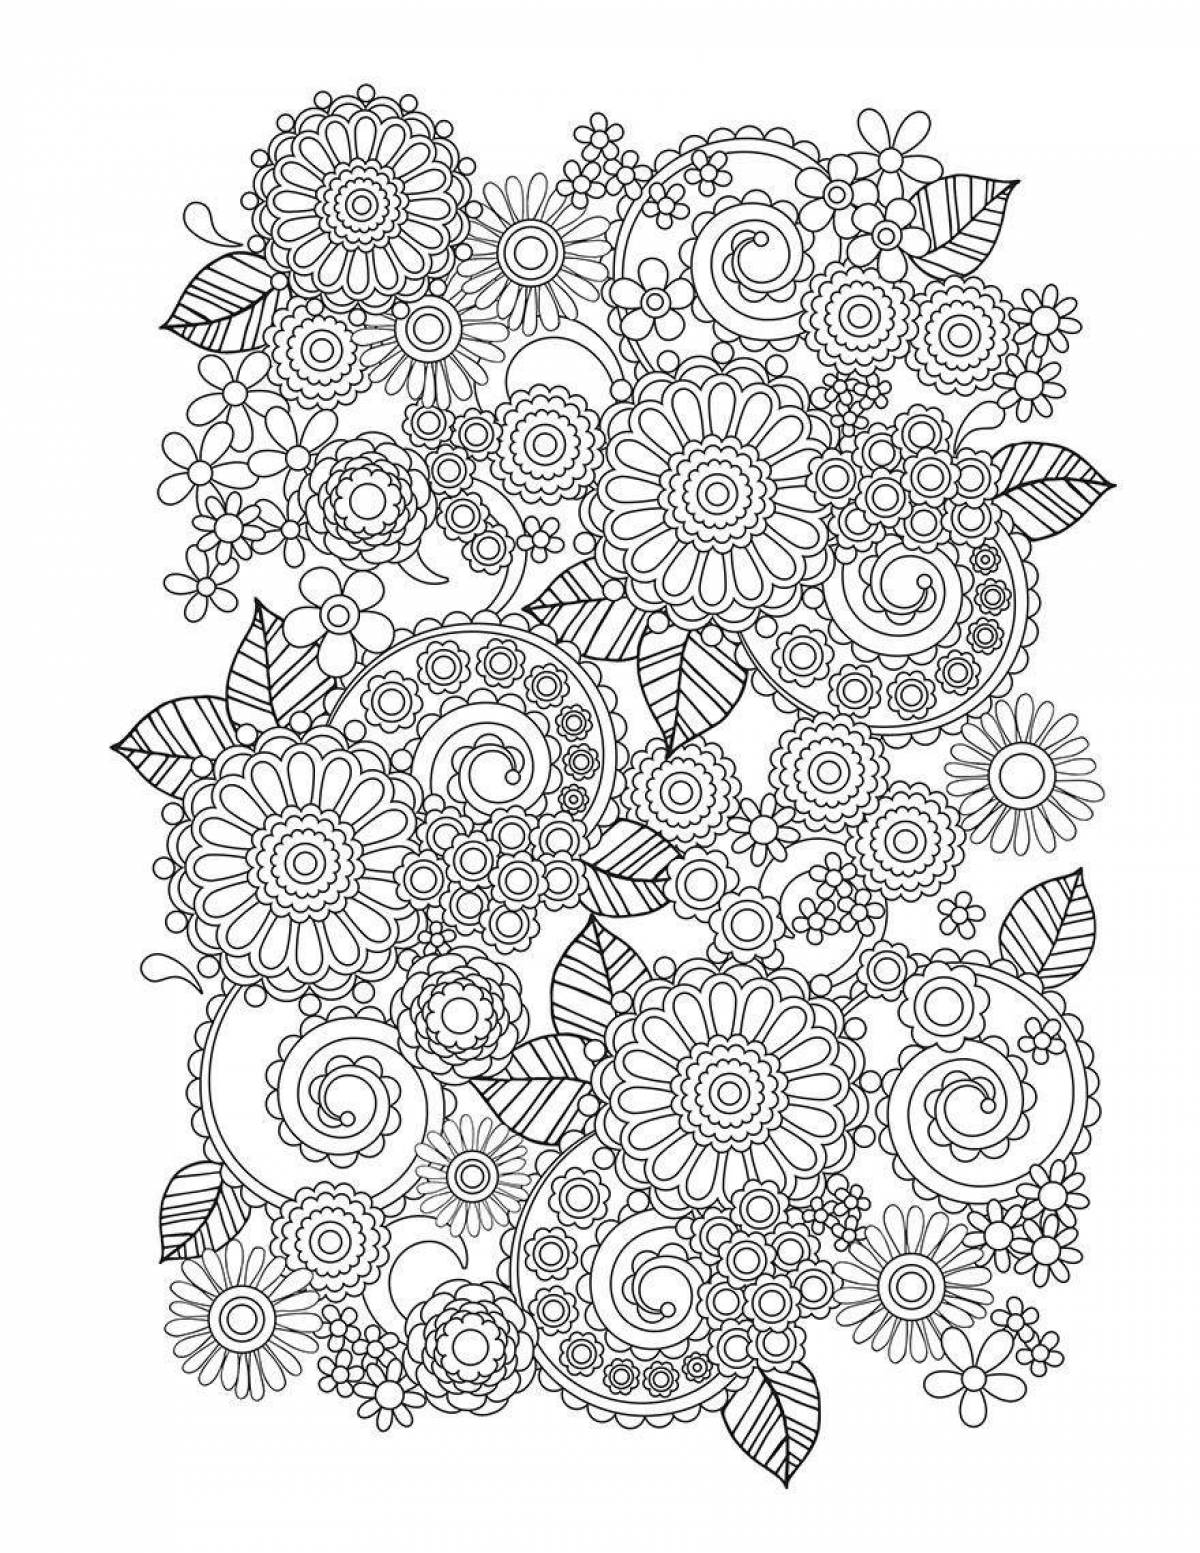 Radiant coloring page small details for girls